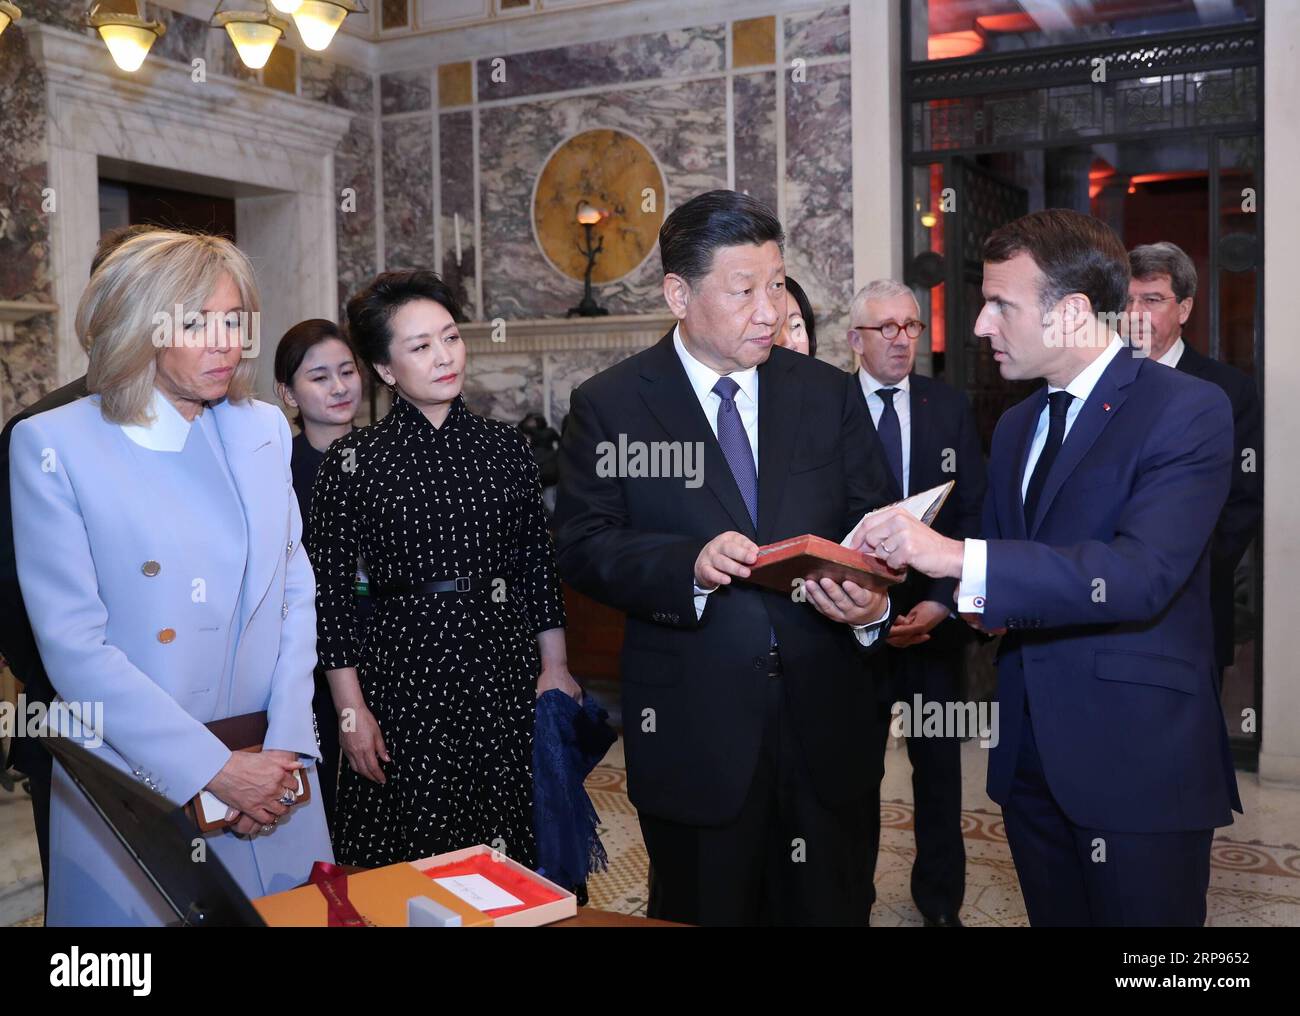 (190325) -- PARIS, March 25, 2019 -- Chinese President Xi Jinping (2nd R) receives the original French version of An Introduction to The Analects of Confucius , published in 1688, from his French counterpart Emmanuel Macron (1st R), as a national gift before their meeting in Nice, France, on March 24, 2019. ) FRANCE-NICE-CHINA-XI JINPING-MACRON-GIFT JuxPeng PUBLICATIONxNOTxINxCHN Stock Photo